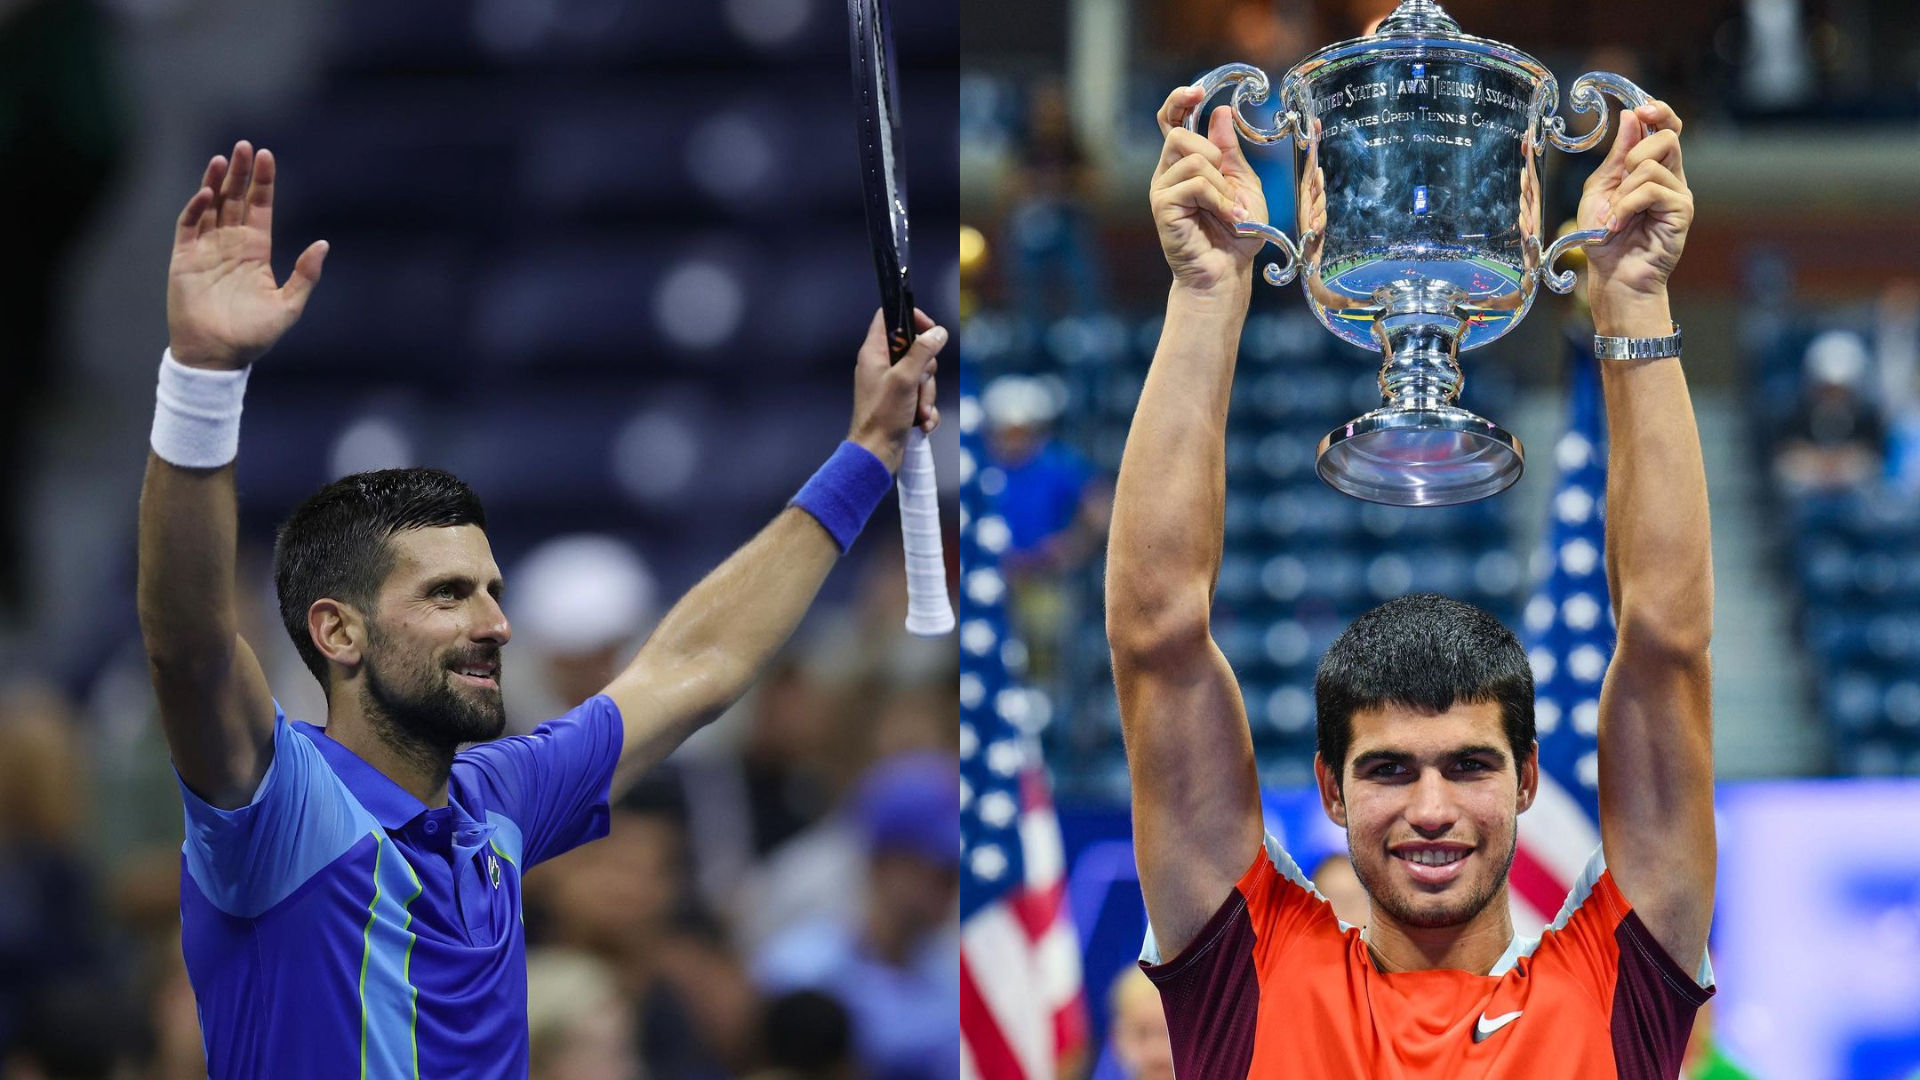 What Is The US Open 2023 Prize Money The Winners Will Receive?